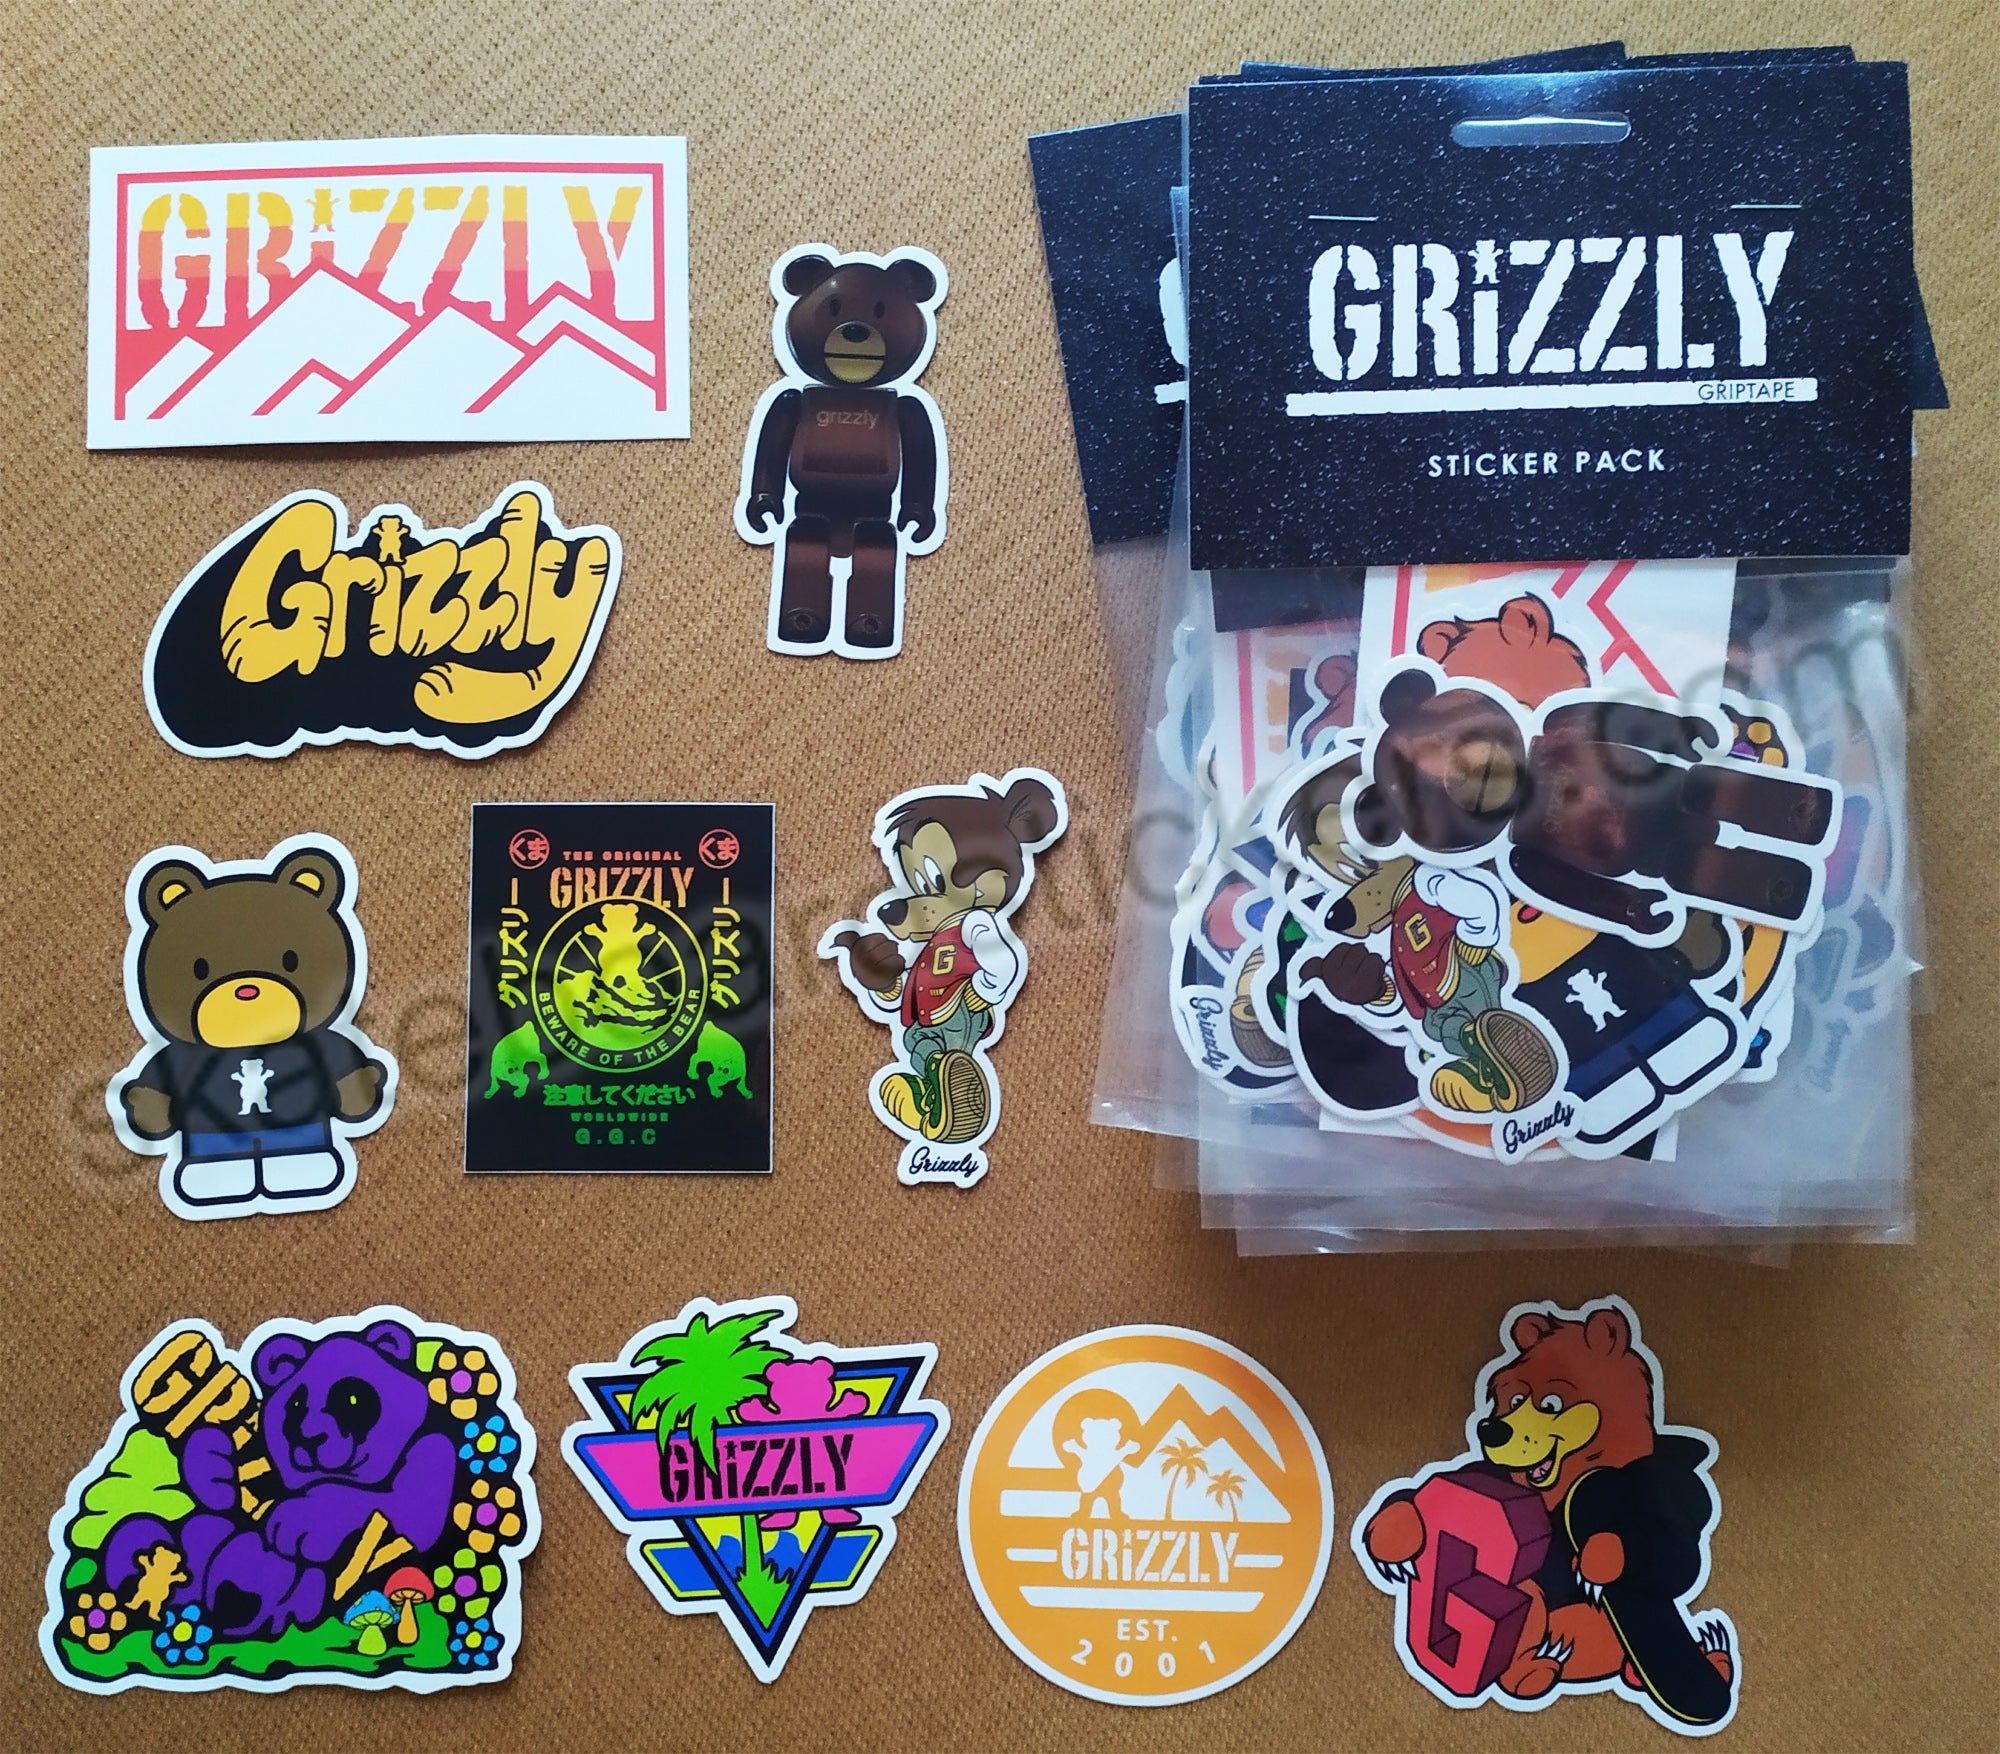 Grizzly Griptape Skateboard Sticker Pack - 10 stickers